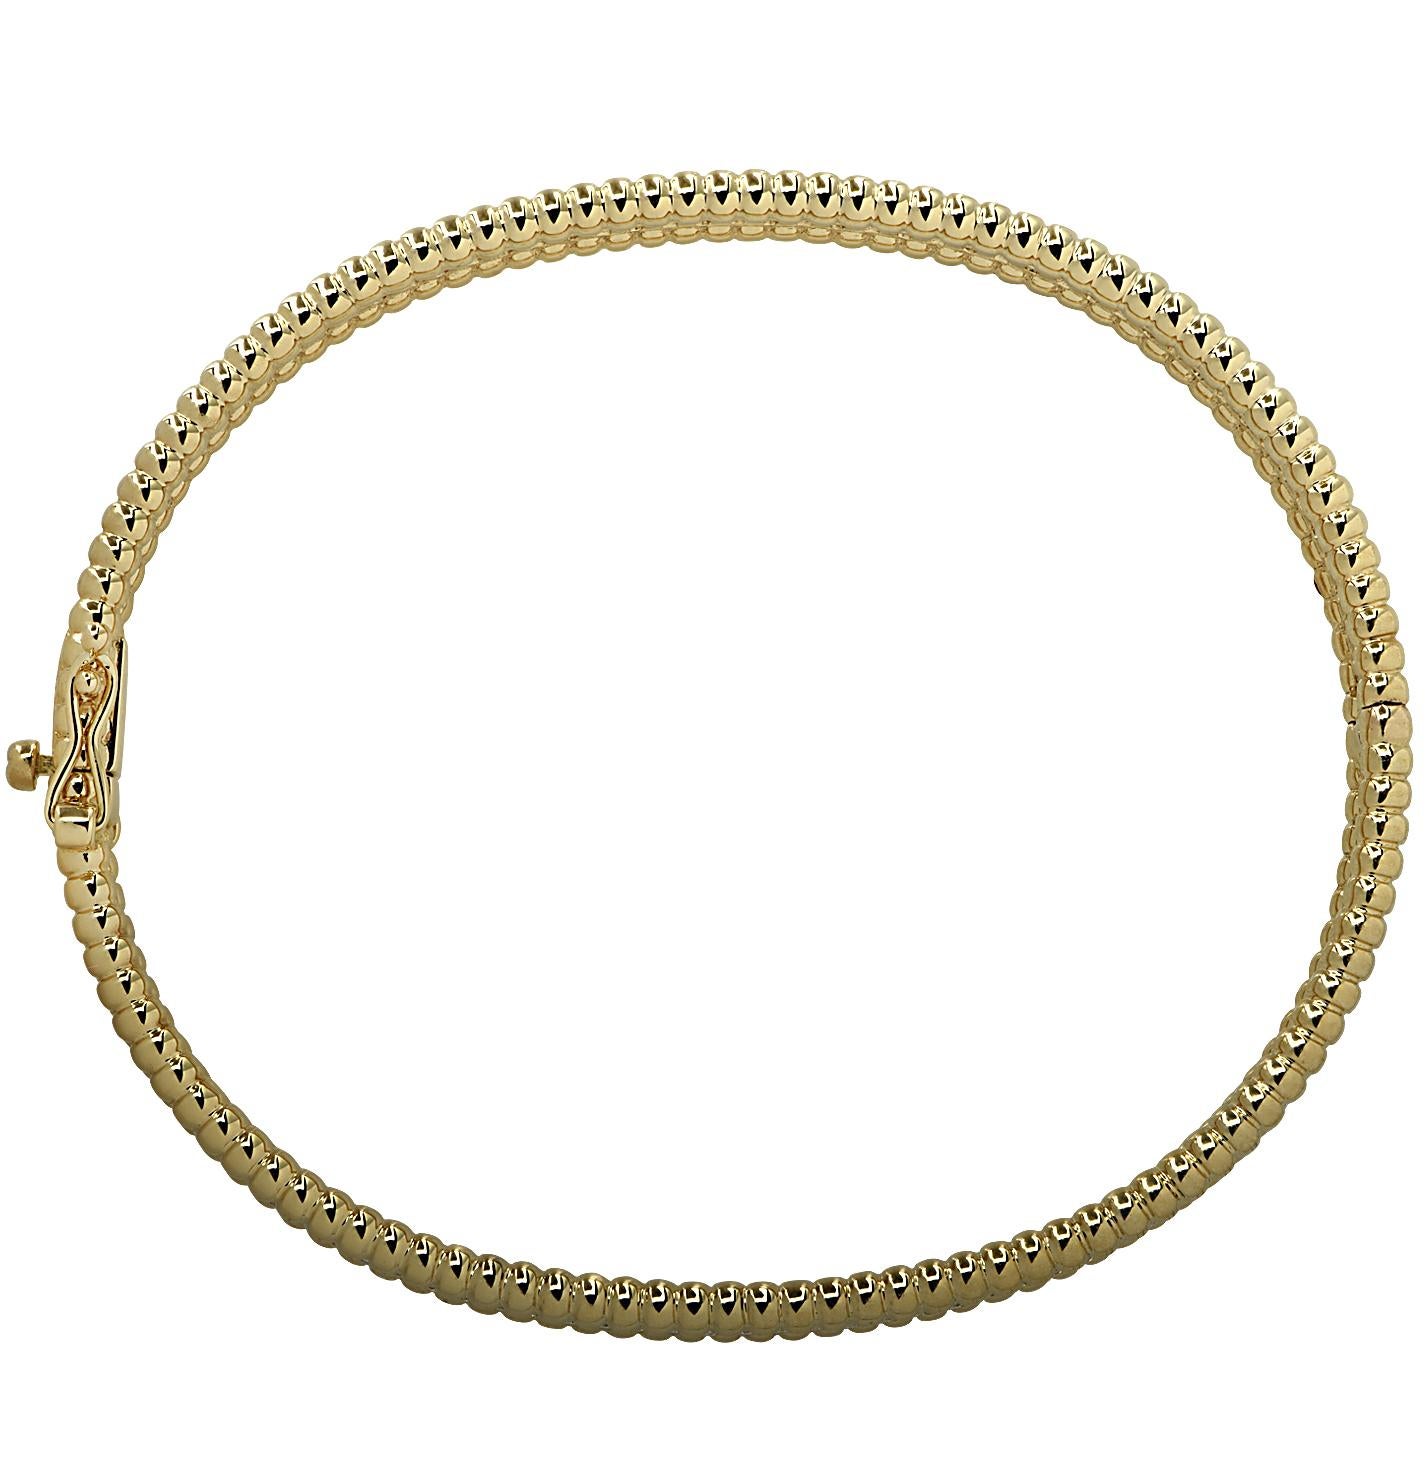 Stunning Vivid Diamonds Bangle Bracelet crafted in yellow gold, featuring 262 round brilliant cut diamonds weighing 2.88 carats total, F-G color, VS-SI clarity. This elegant bangle is set with three rows of diamonds, laced with yellow gold beads